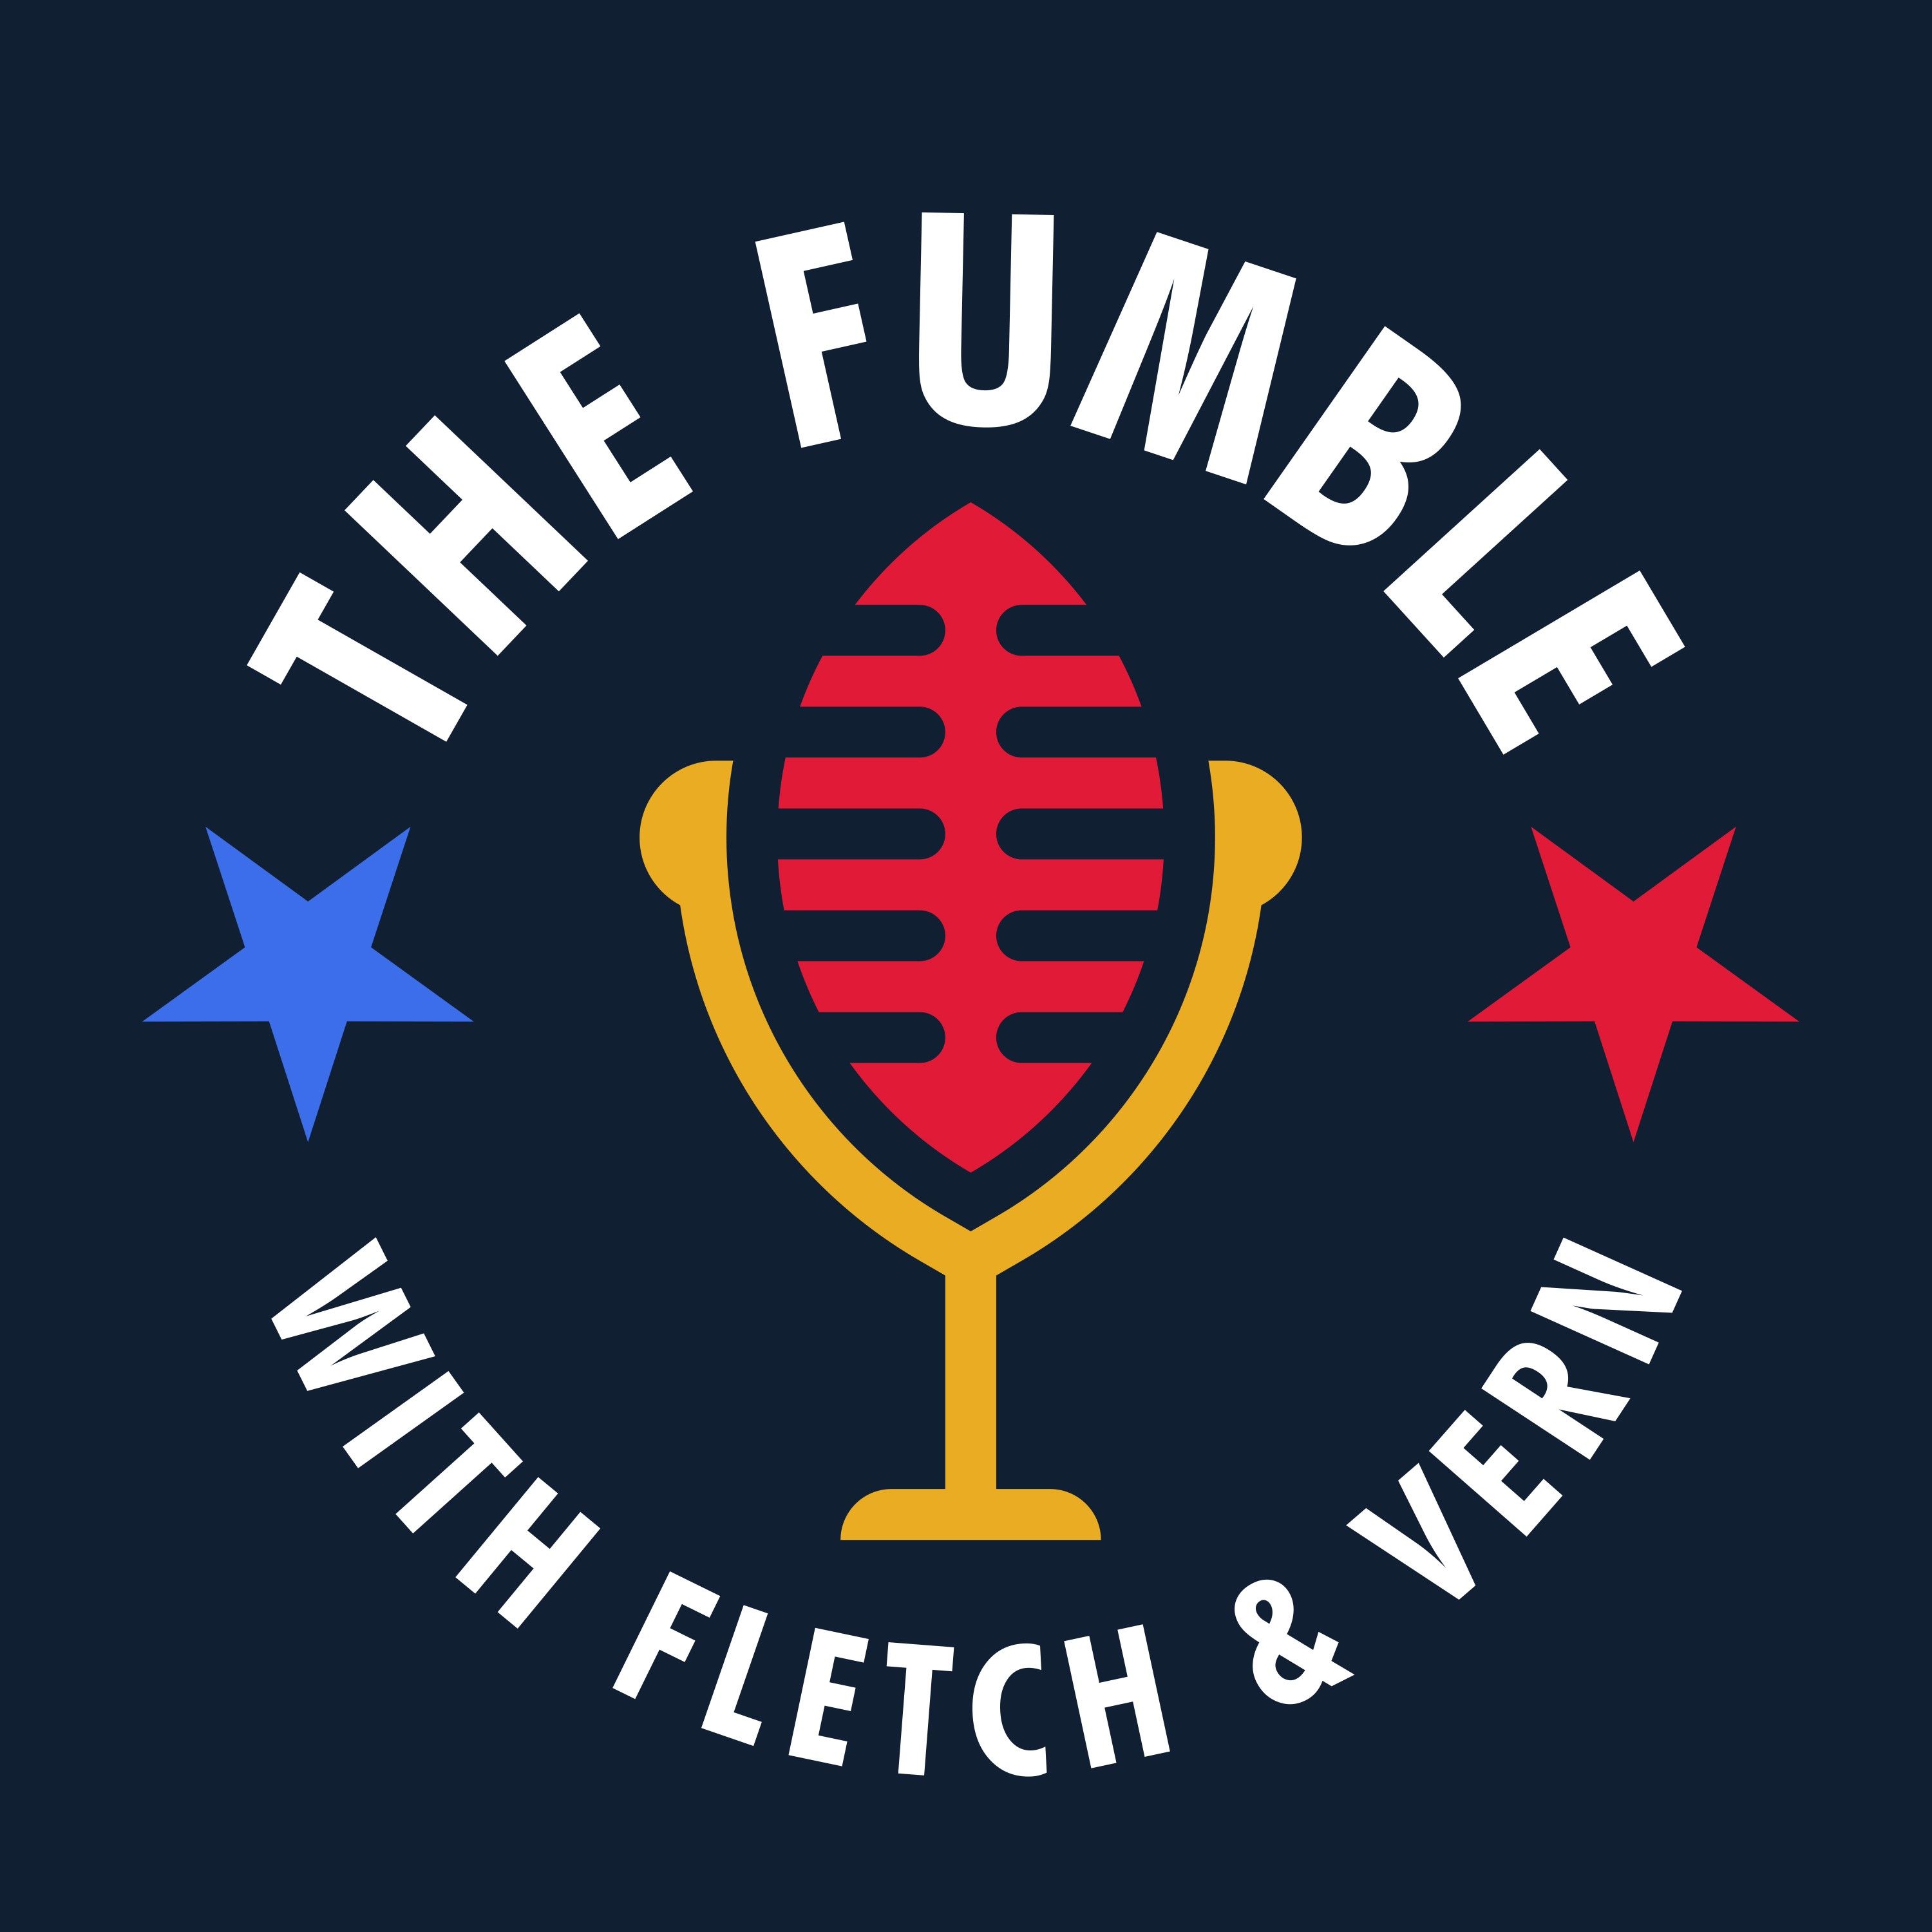 THE FUMBLE with FLETCH & VERN S3E6 LIVE FROM TOTTENHAM